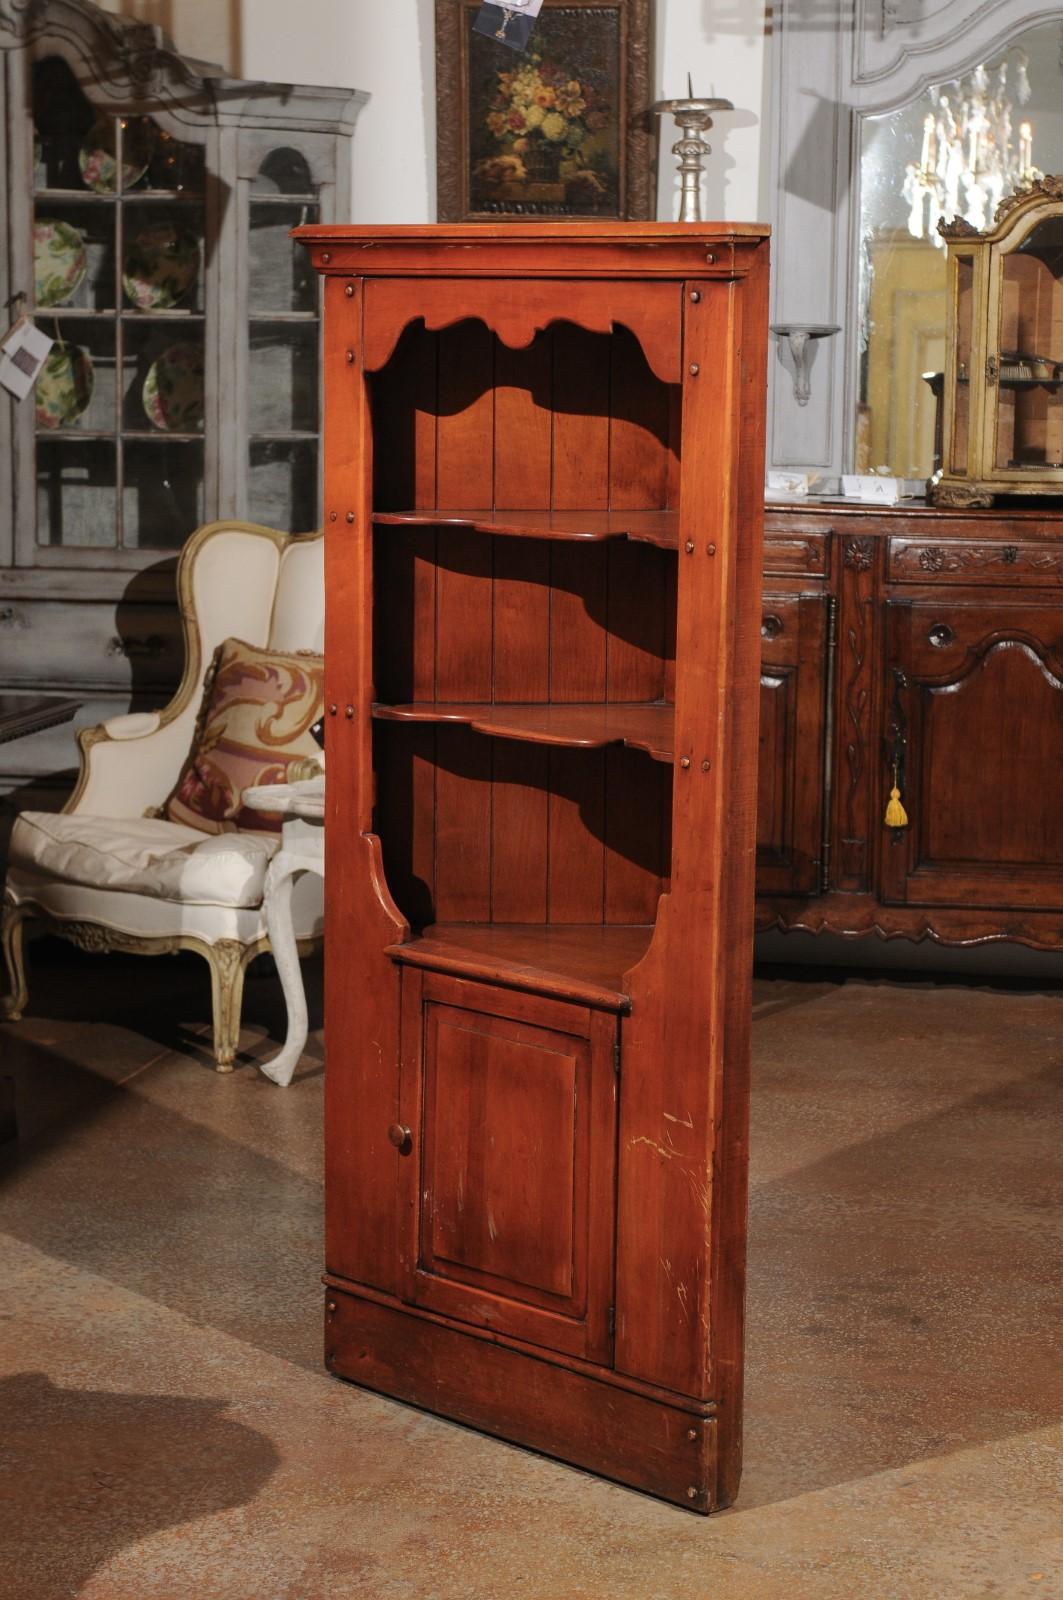 Early 20th Century American Cherry Corner Cabinet with Shelves and Single Door 9